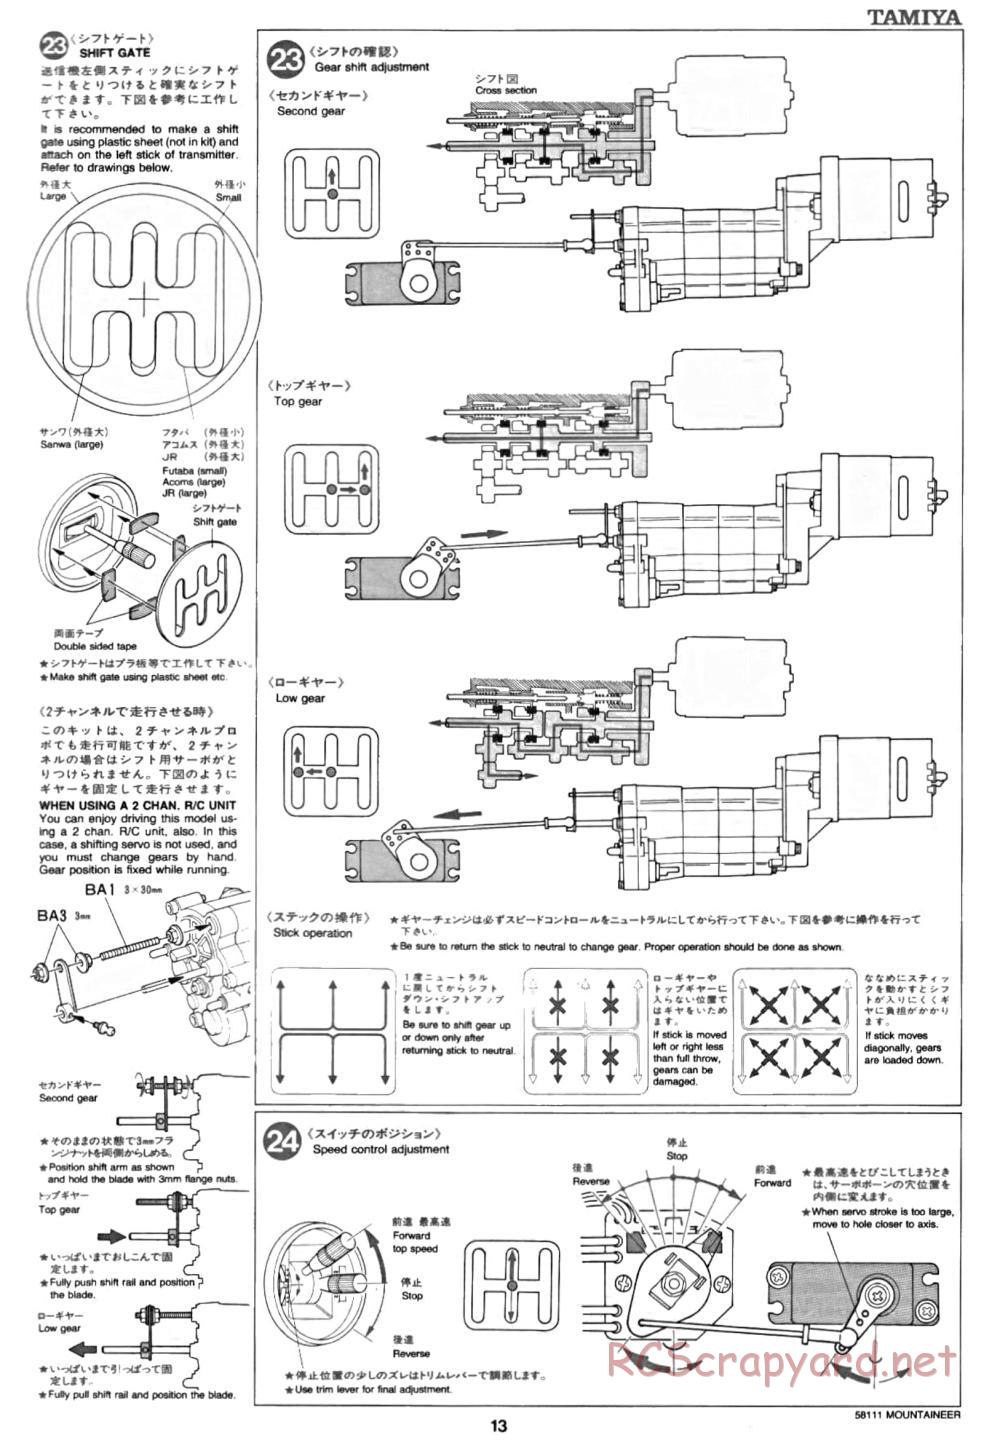 Tamiya - Toyota 4x4 Pick Up Mountaineer Chassis - Manual - Page 13